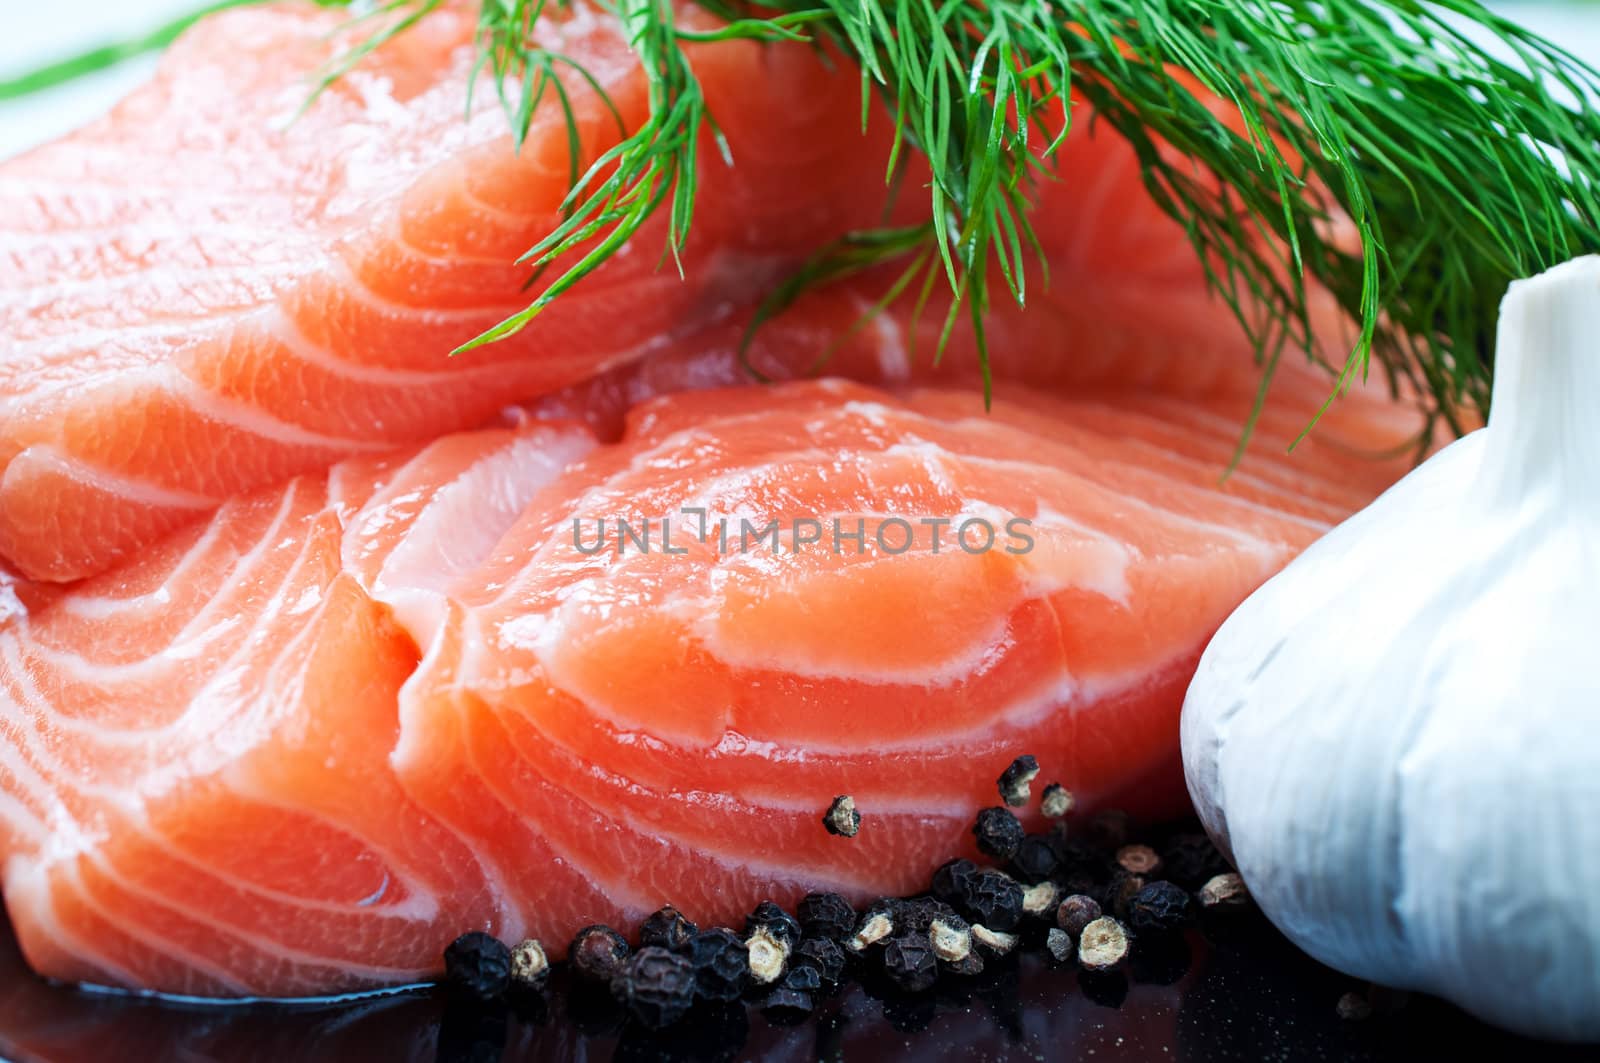 Salmon with black pepper and garlic on plate close up